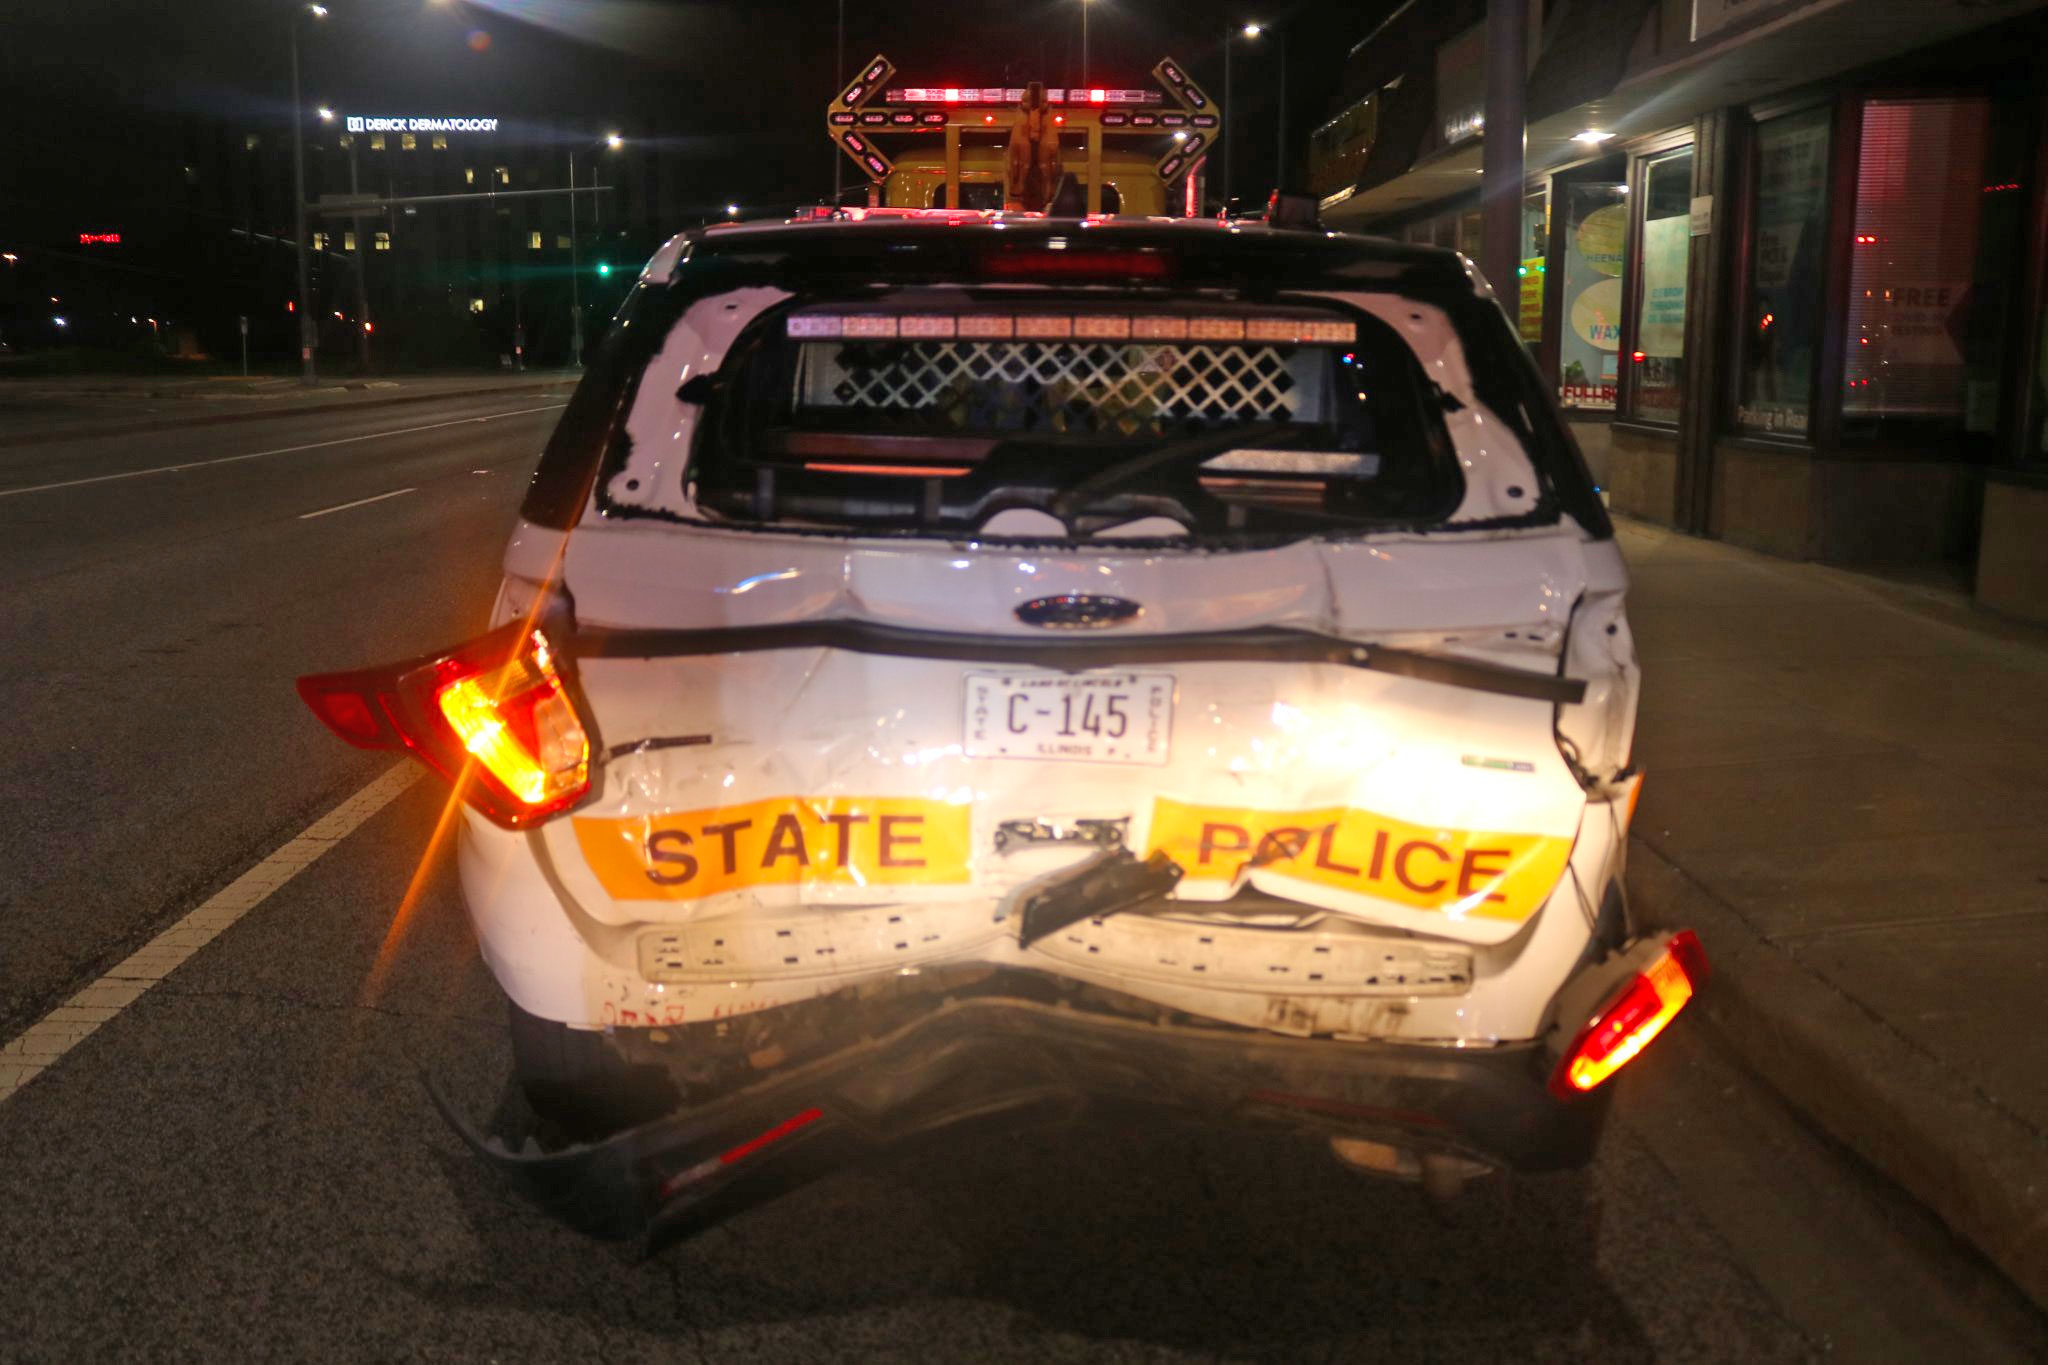 Illinois State Police Ford Interceptor rear-ended on I-90 WEST near Cumberland Avenue (SOURCE: Illinois State Police)